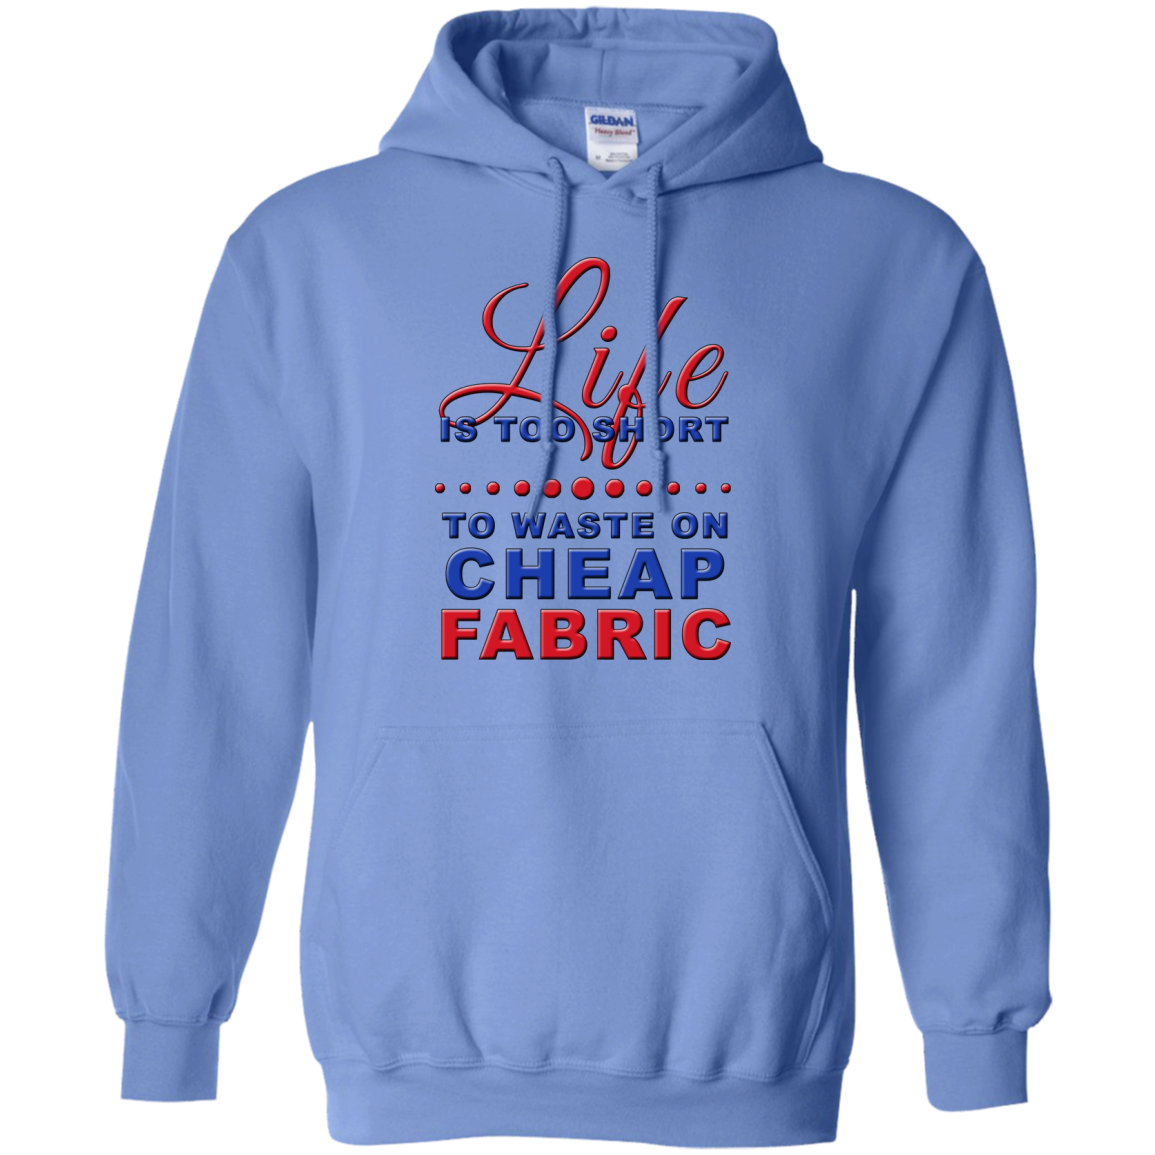 Life is Too Short to Use Cheap Fabric Pullover Hoodies - Crafter4Life - 1